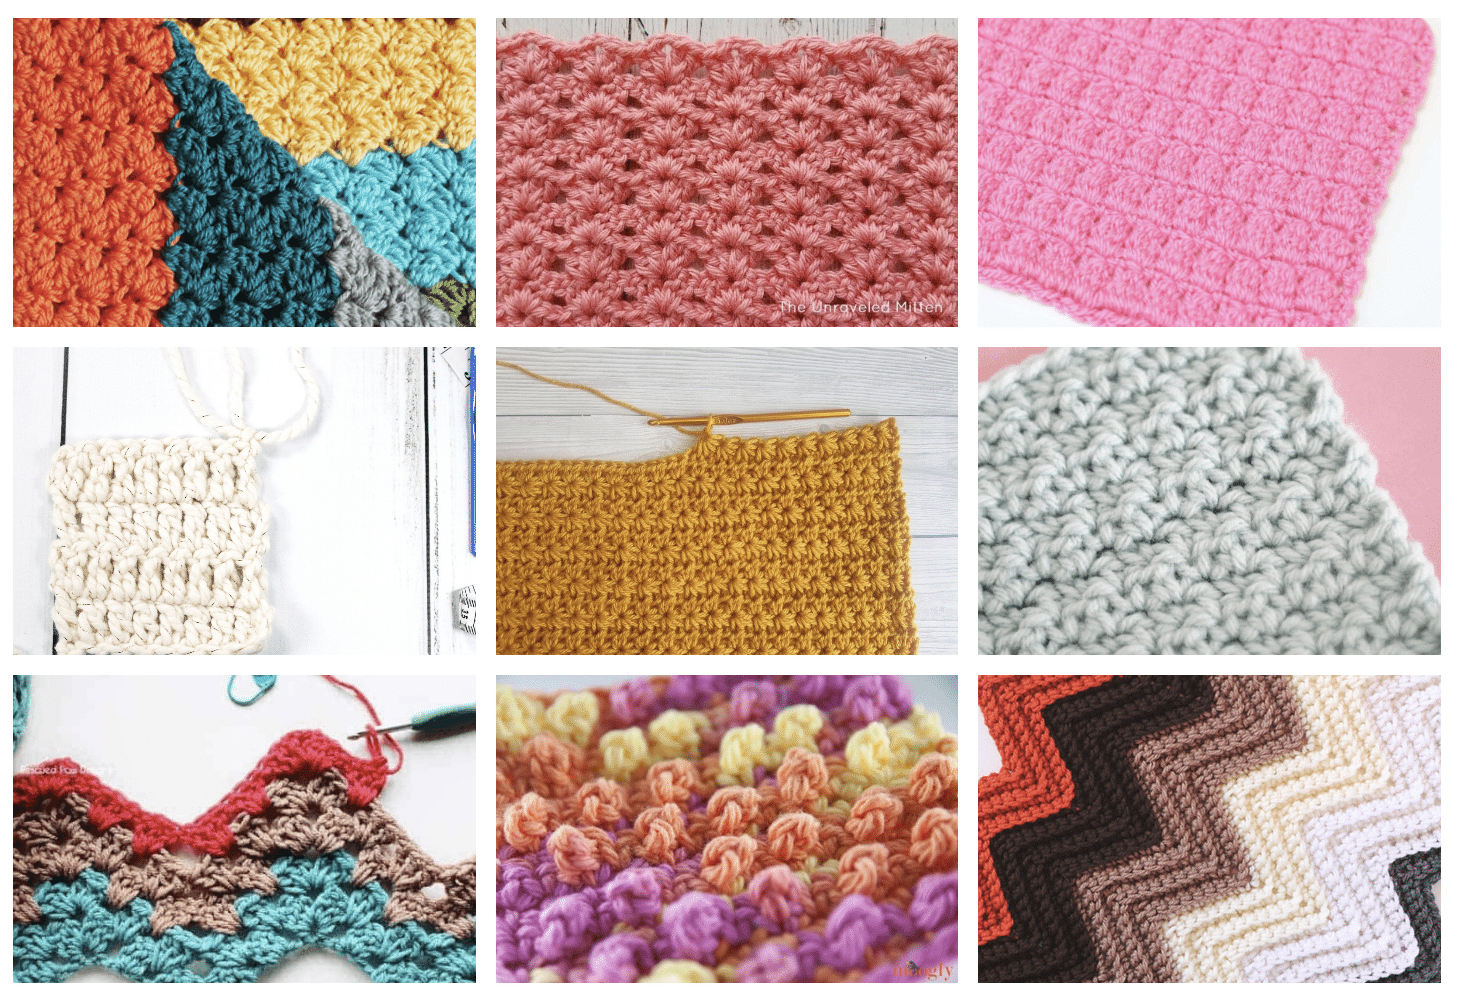 How Many Crochet Stitches Are There?